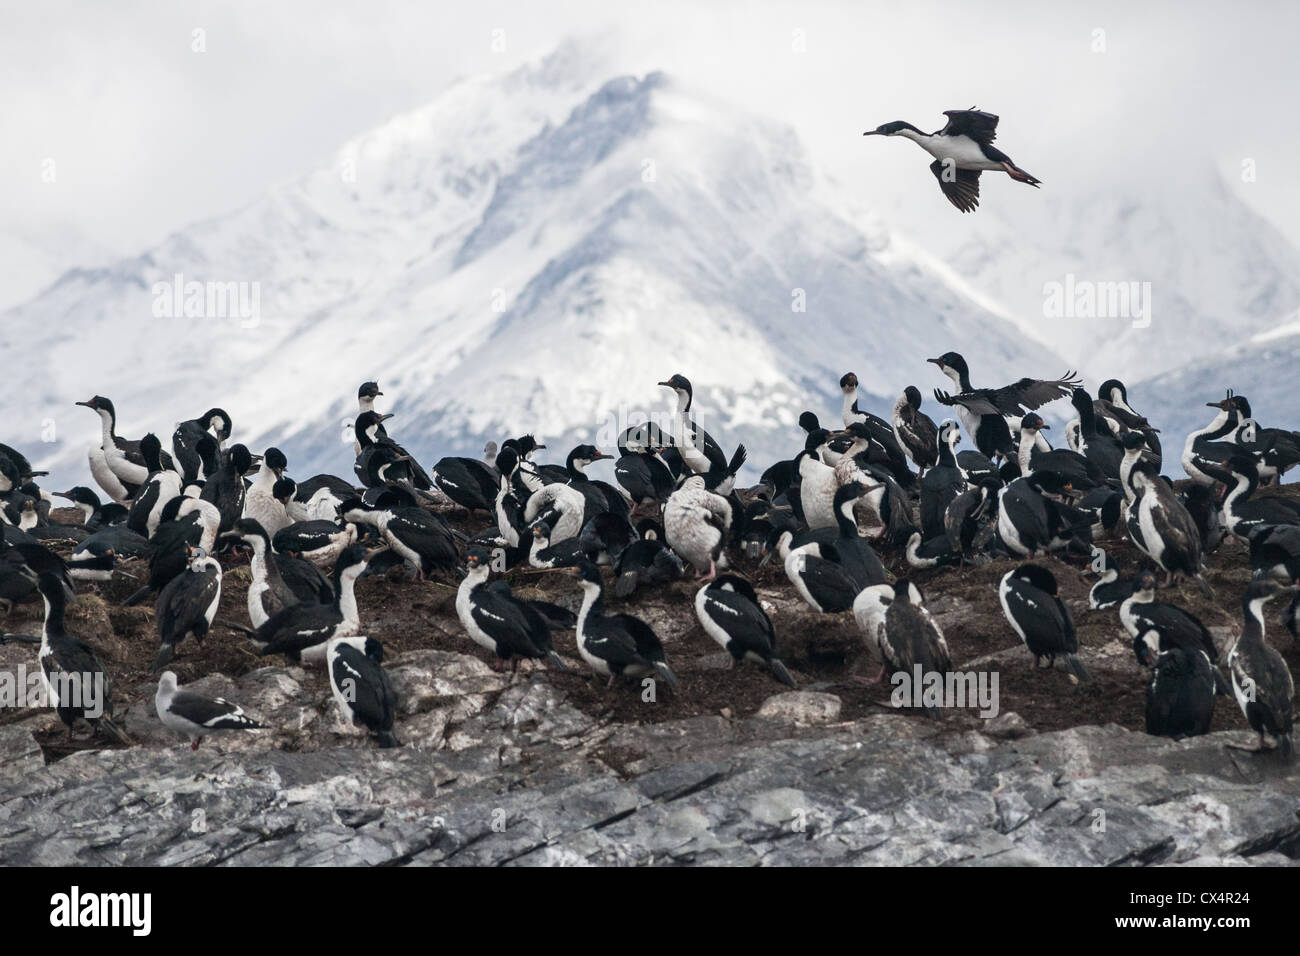 A flock of rock shags in the Patagonia region of Argentina Stock Photo